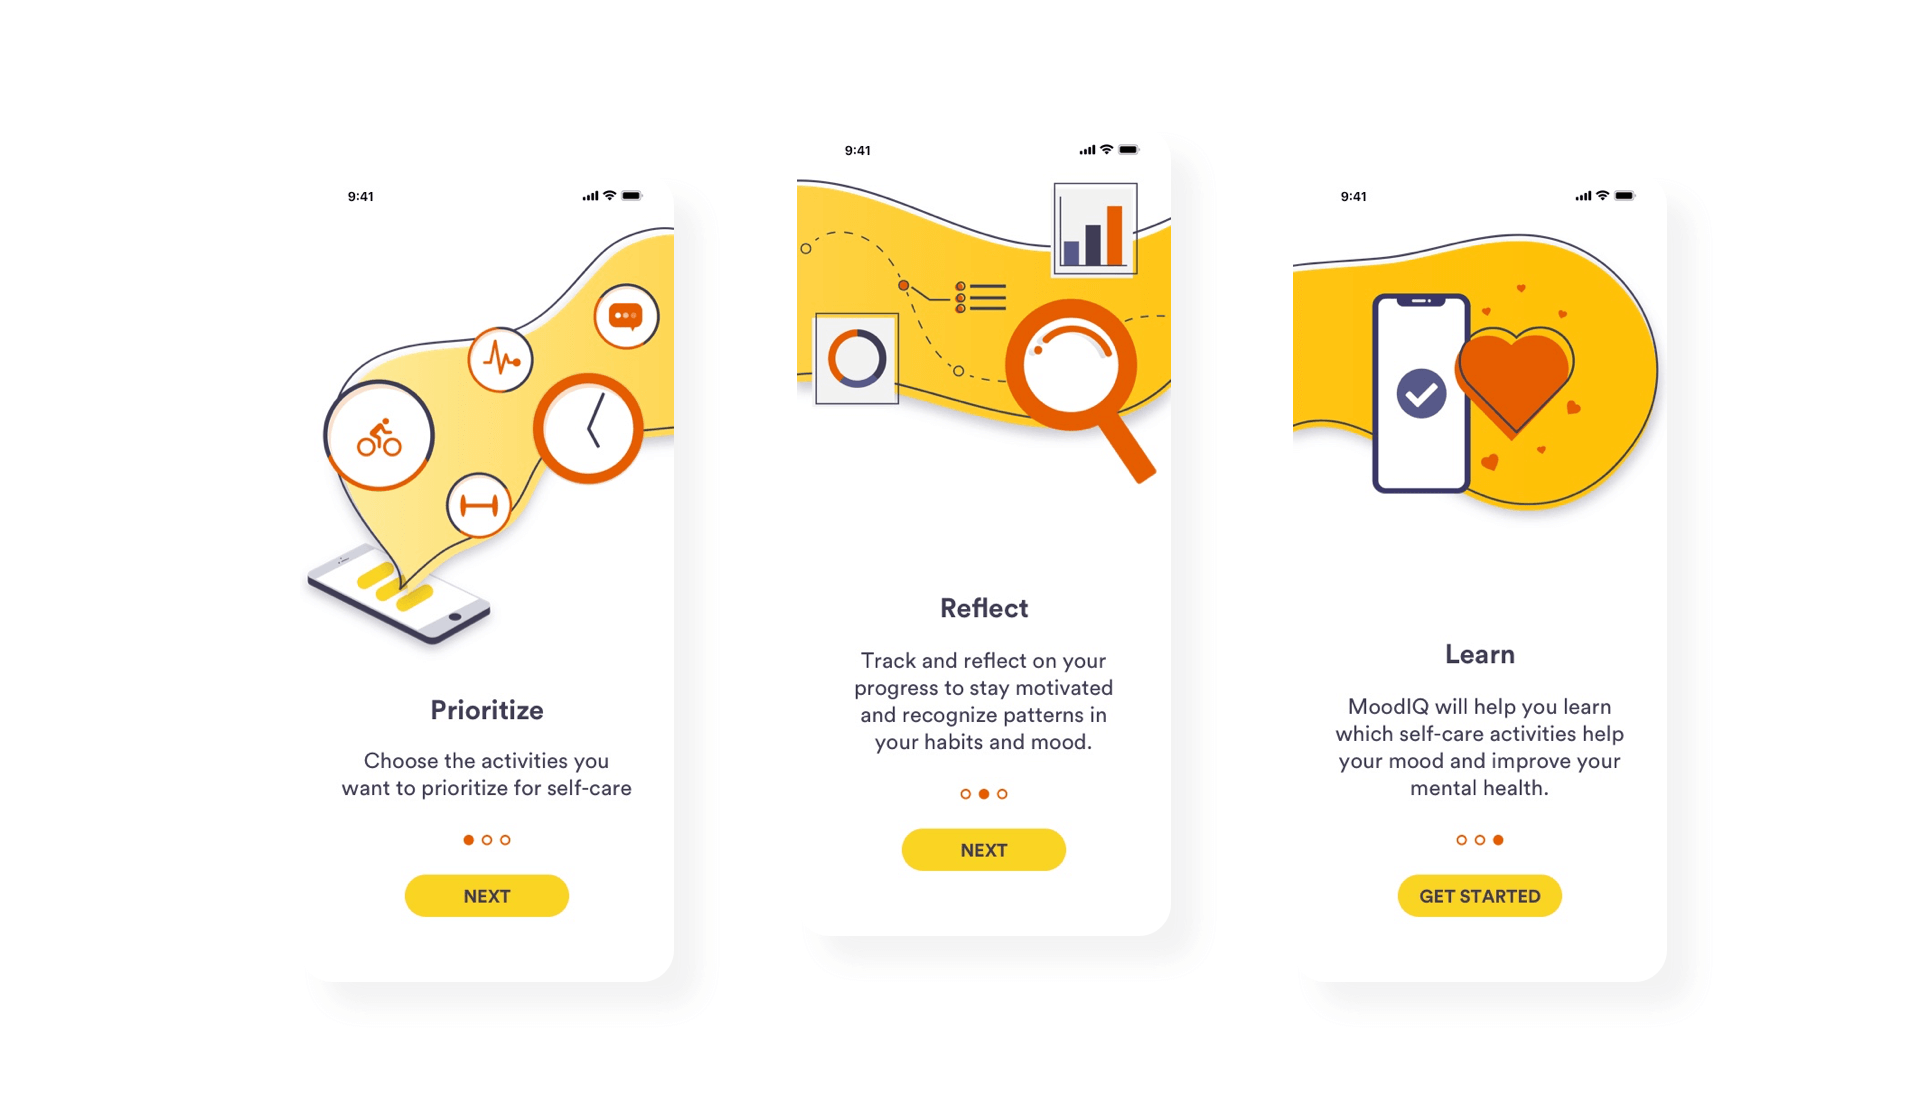 Onboarding images